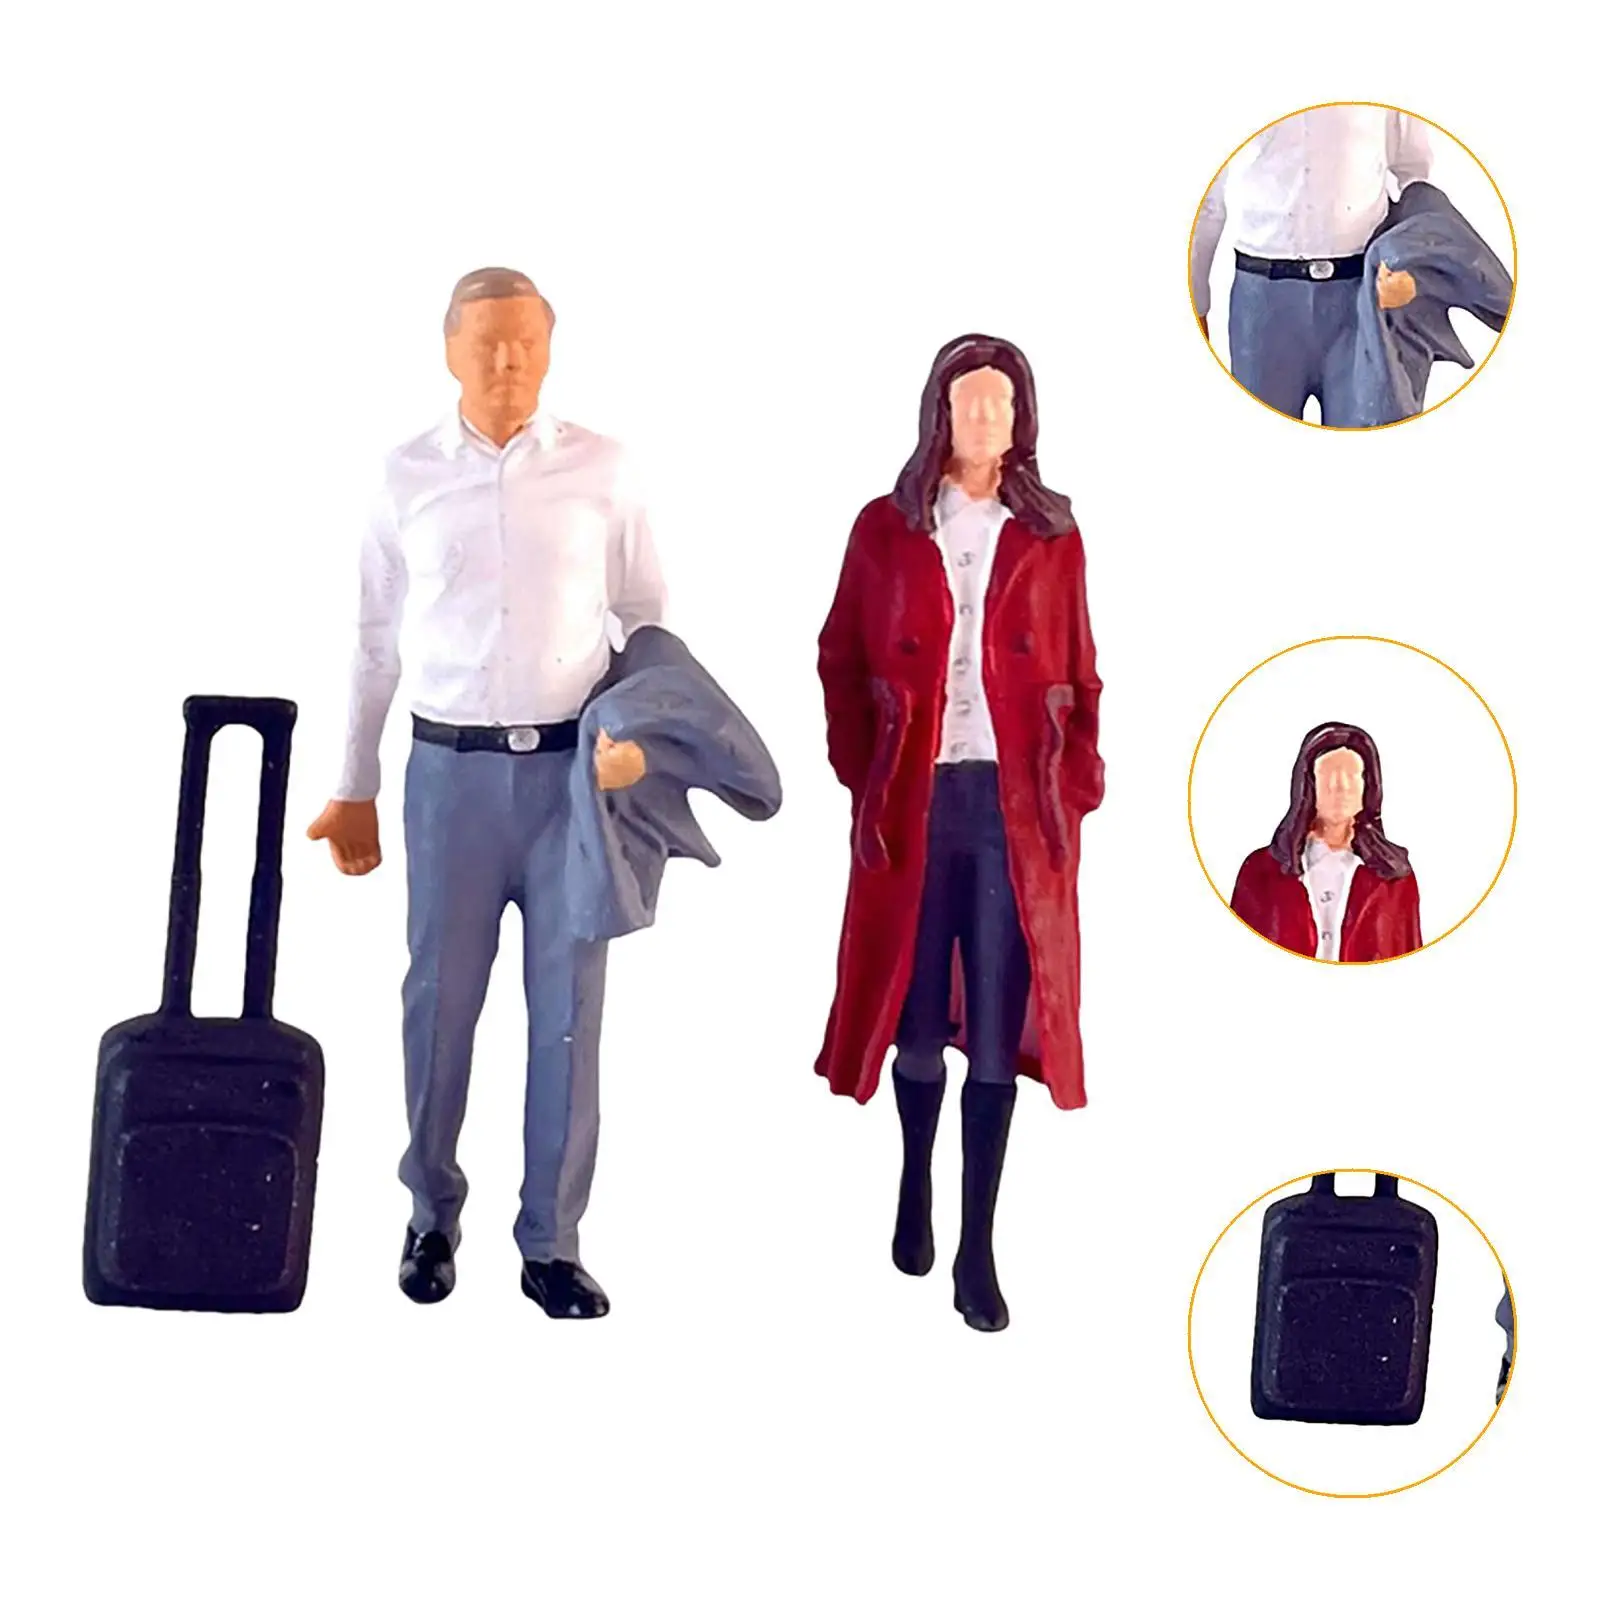 2Pcs 1/64 Women and Men Figures with Suitcase Model Sand Table Layout Decoration Collections S Gauge Resin Figurines Decor